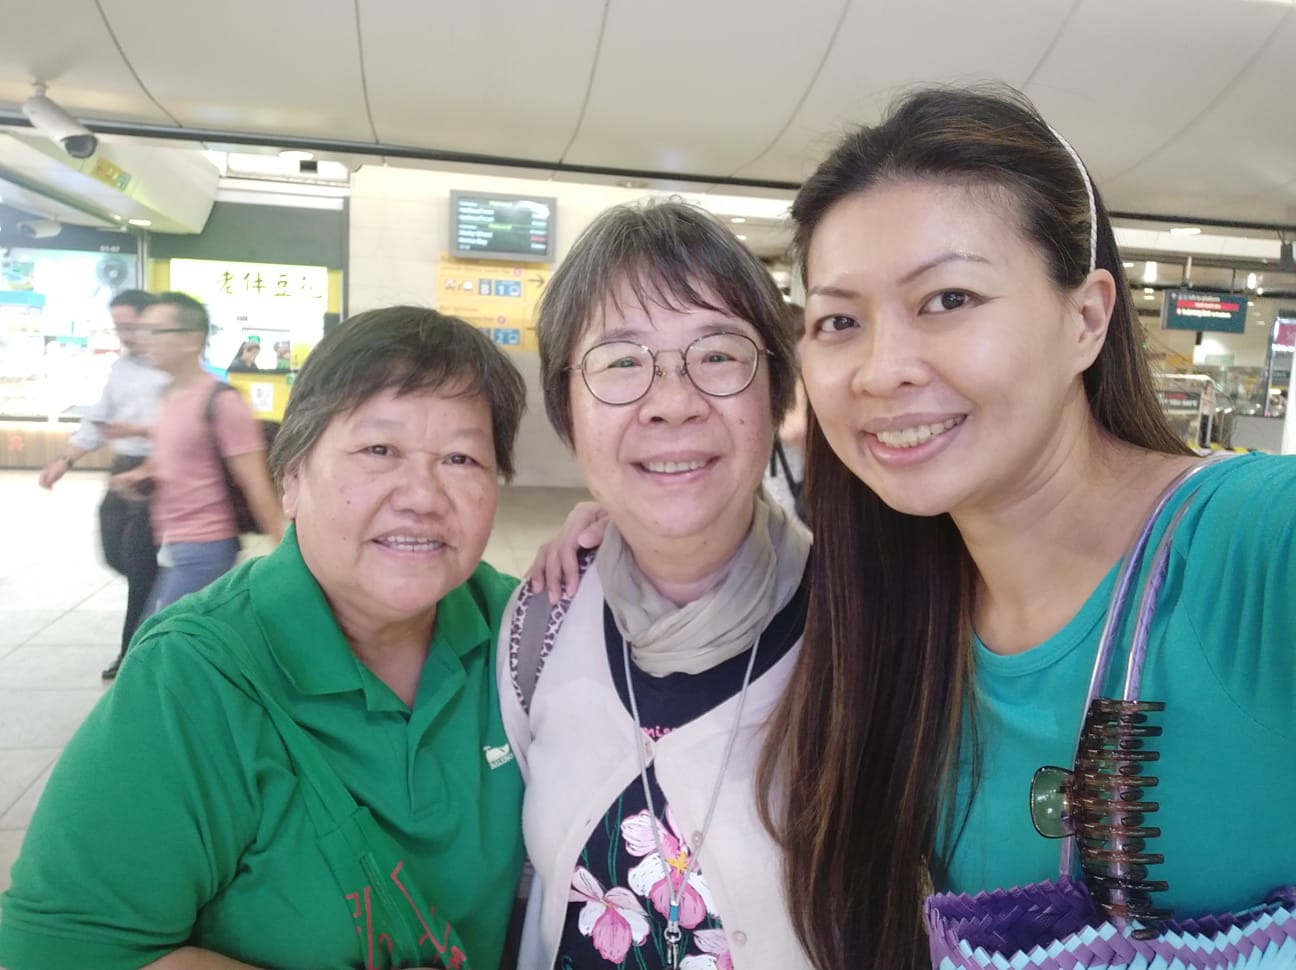 Founders of The Turning Point, Khew Swee Ling (left) and Florence Ng (middle), with a former resident Carol Wee, who overcame her addiction at the halfway house and is now giving her life to prison ministry as well. All photos courtesy of Florence Ng.